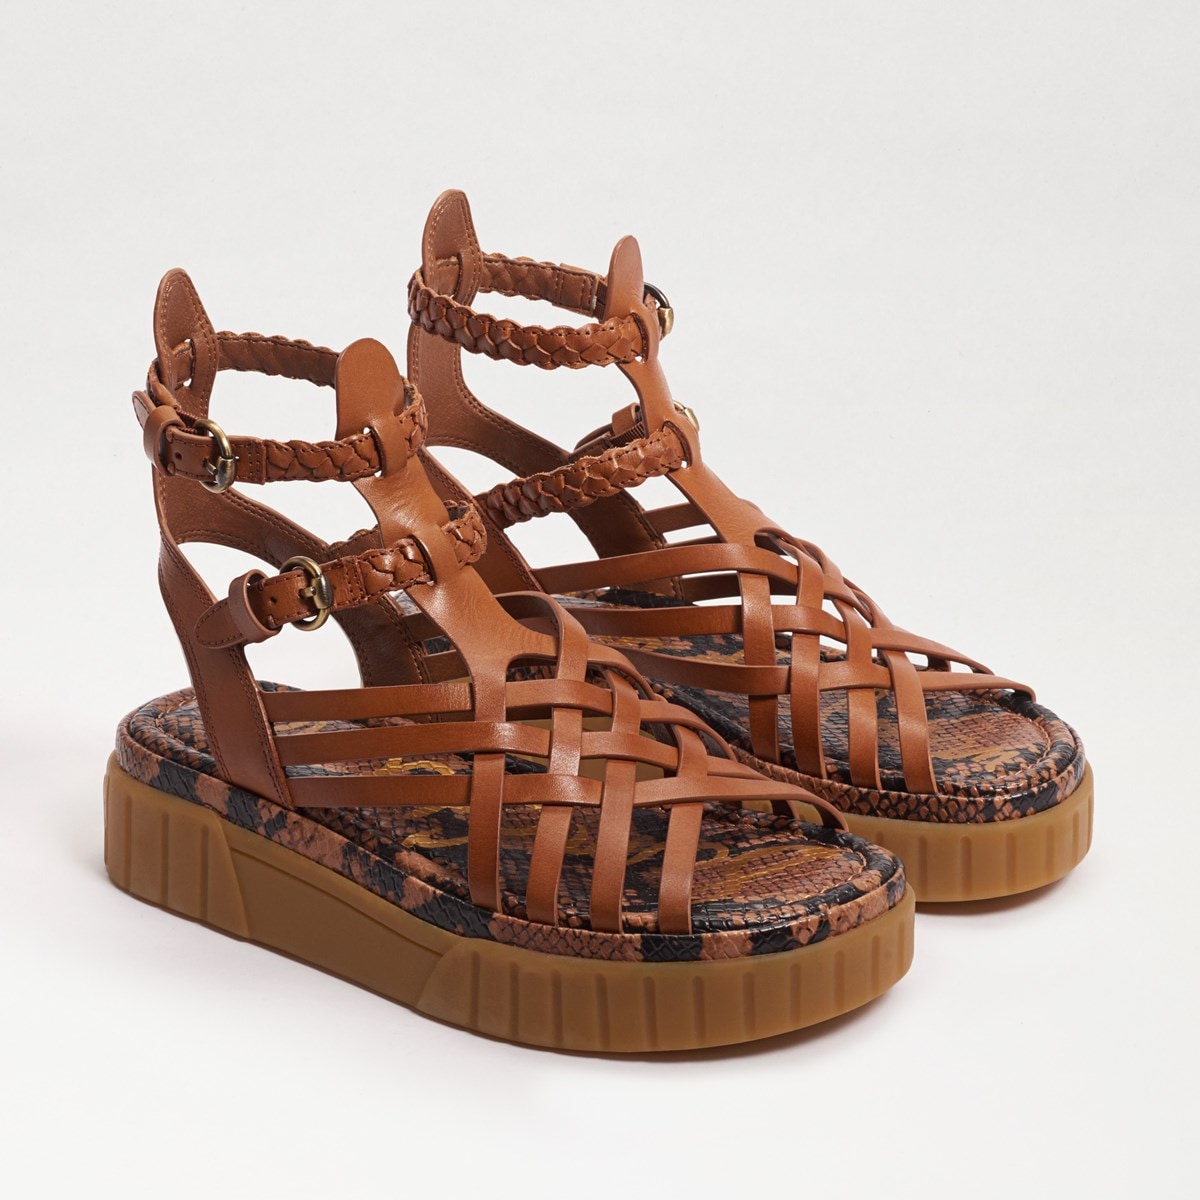 Geana Leather Wedge Sandals 